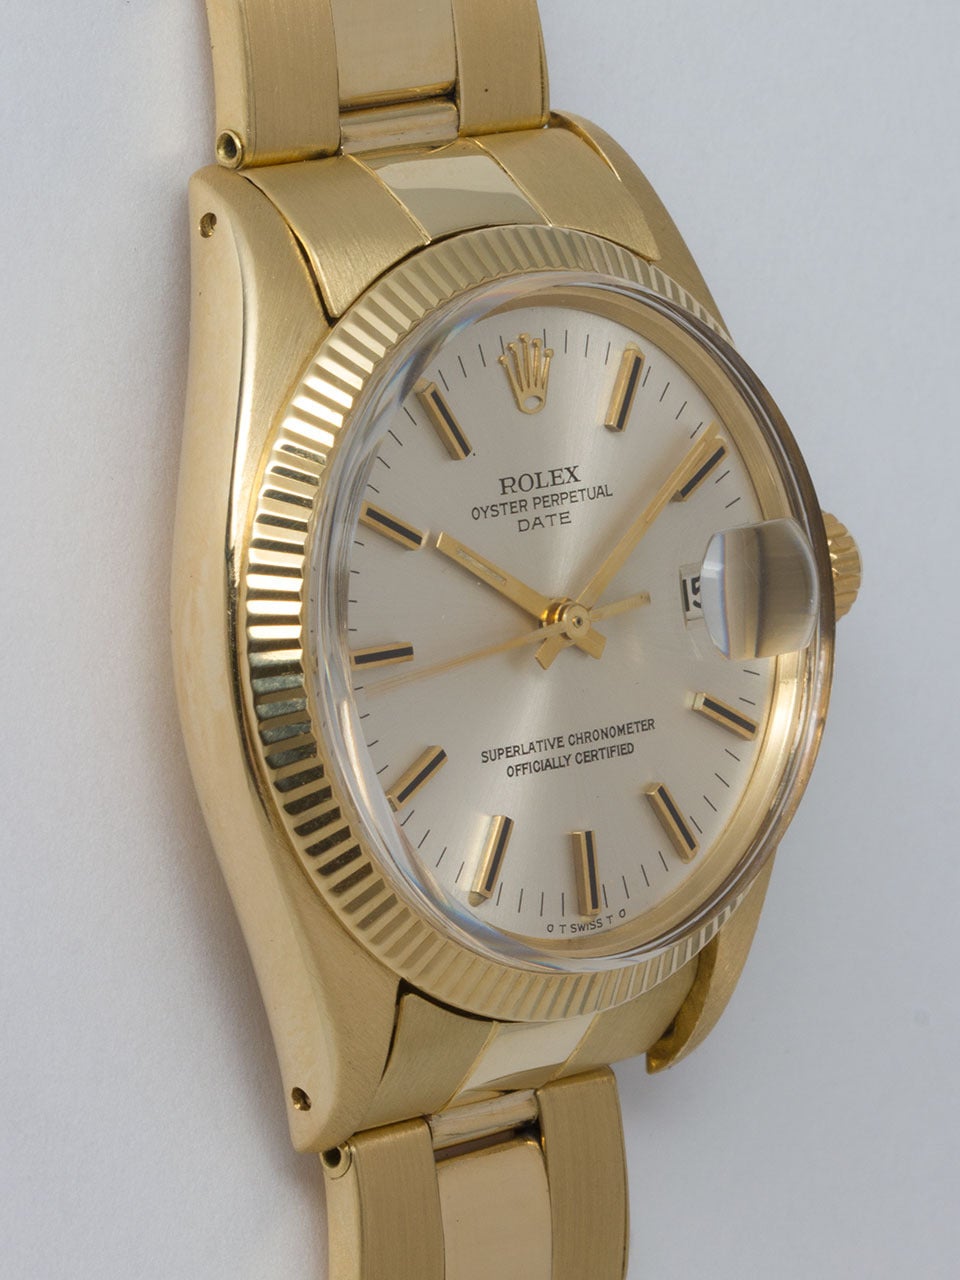 Rolex 14K Yellow Gold Oyster Perpetual Date ref 1503 serial #3.5 million circa 1973. 34mm diameter case with fluted bezel and acrylic crystal. Original silver satin dial with gold applied indexes and gilt baton hands. Powered by caliber 1570 self